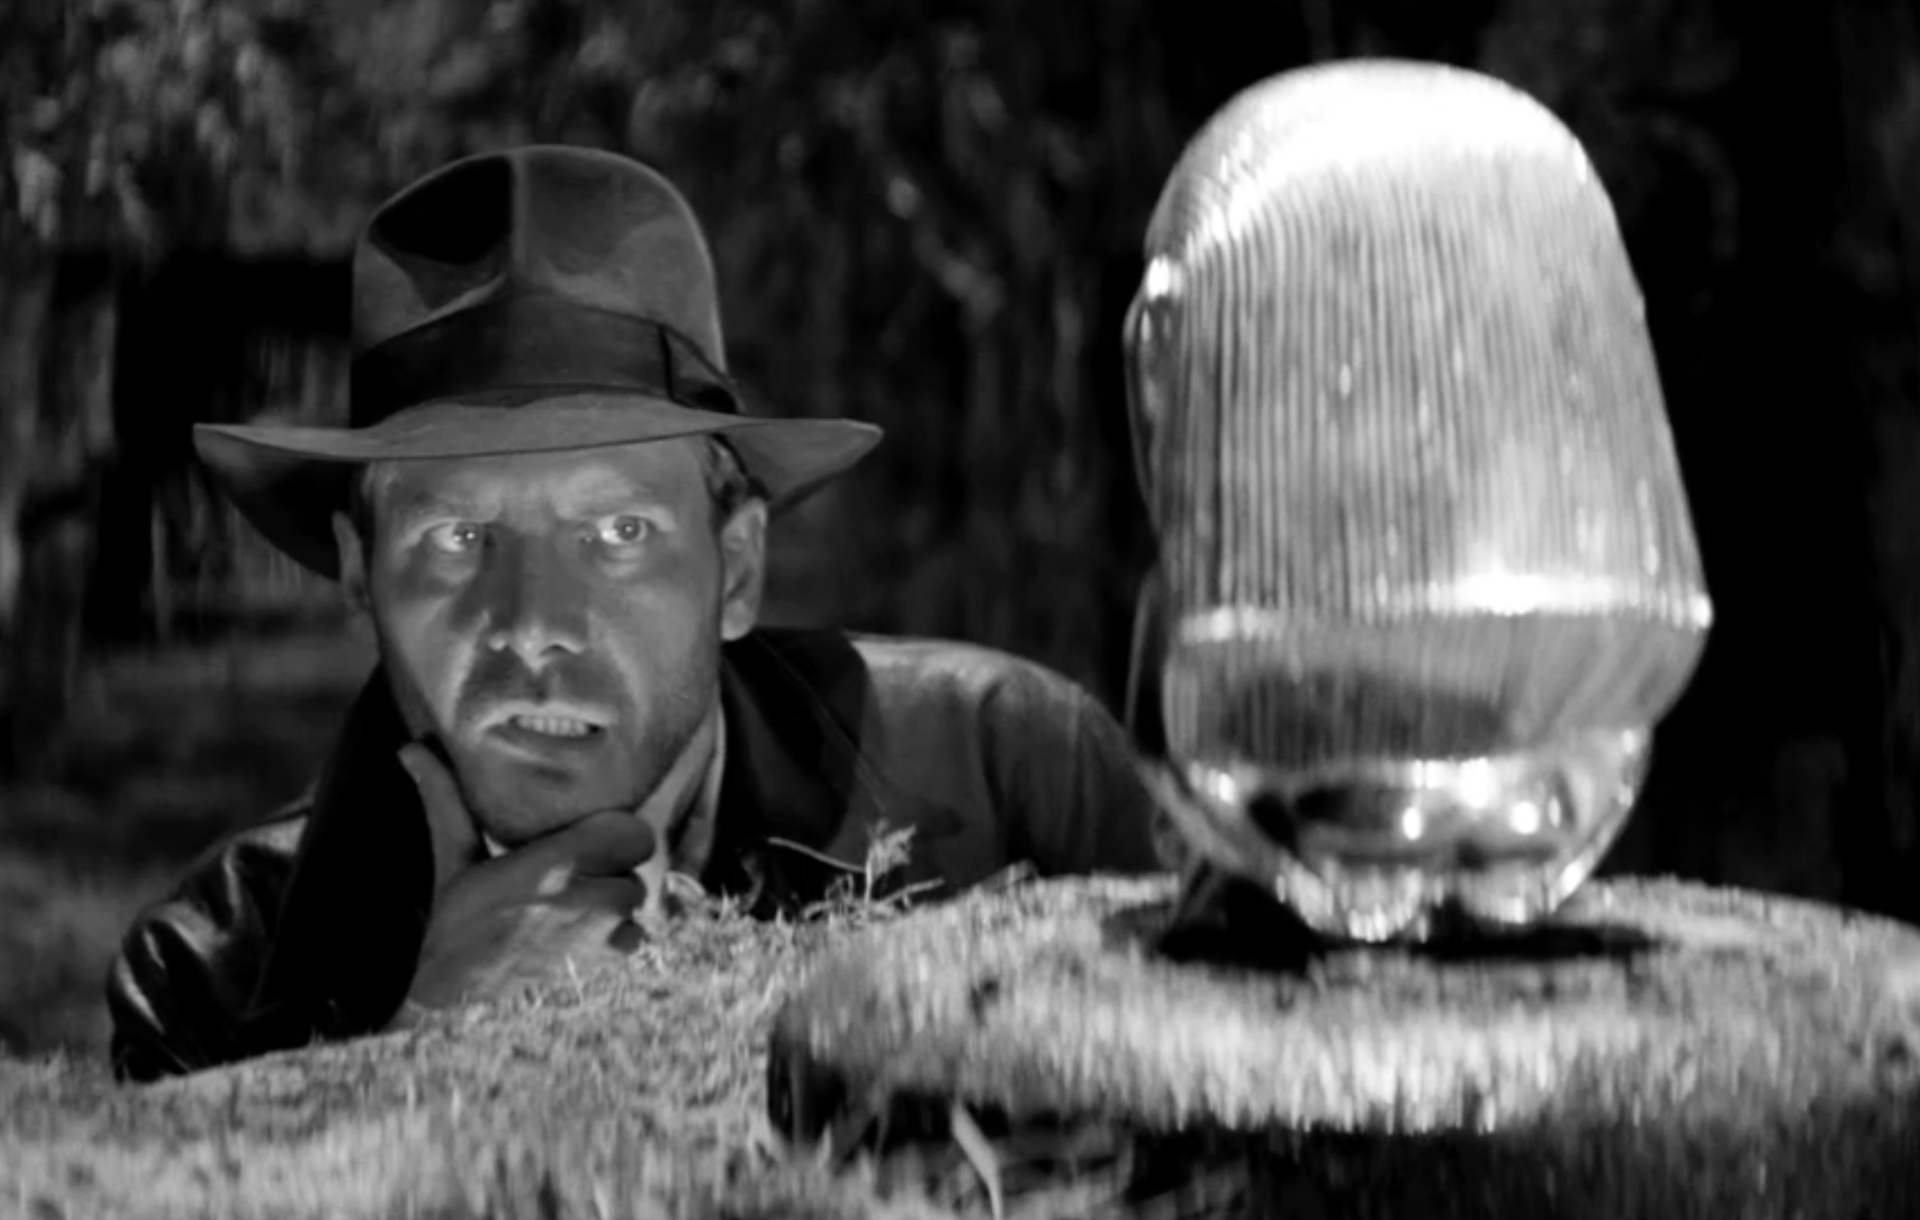 Raiders of the lost ark BW